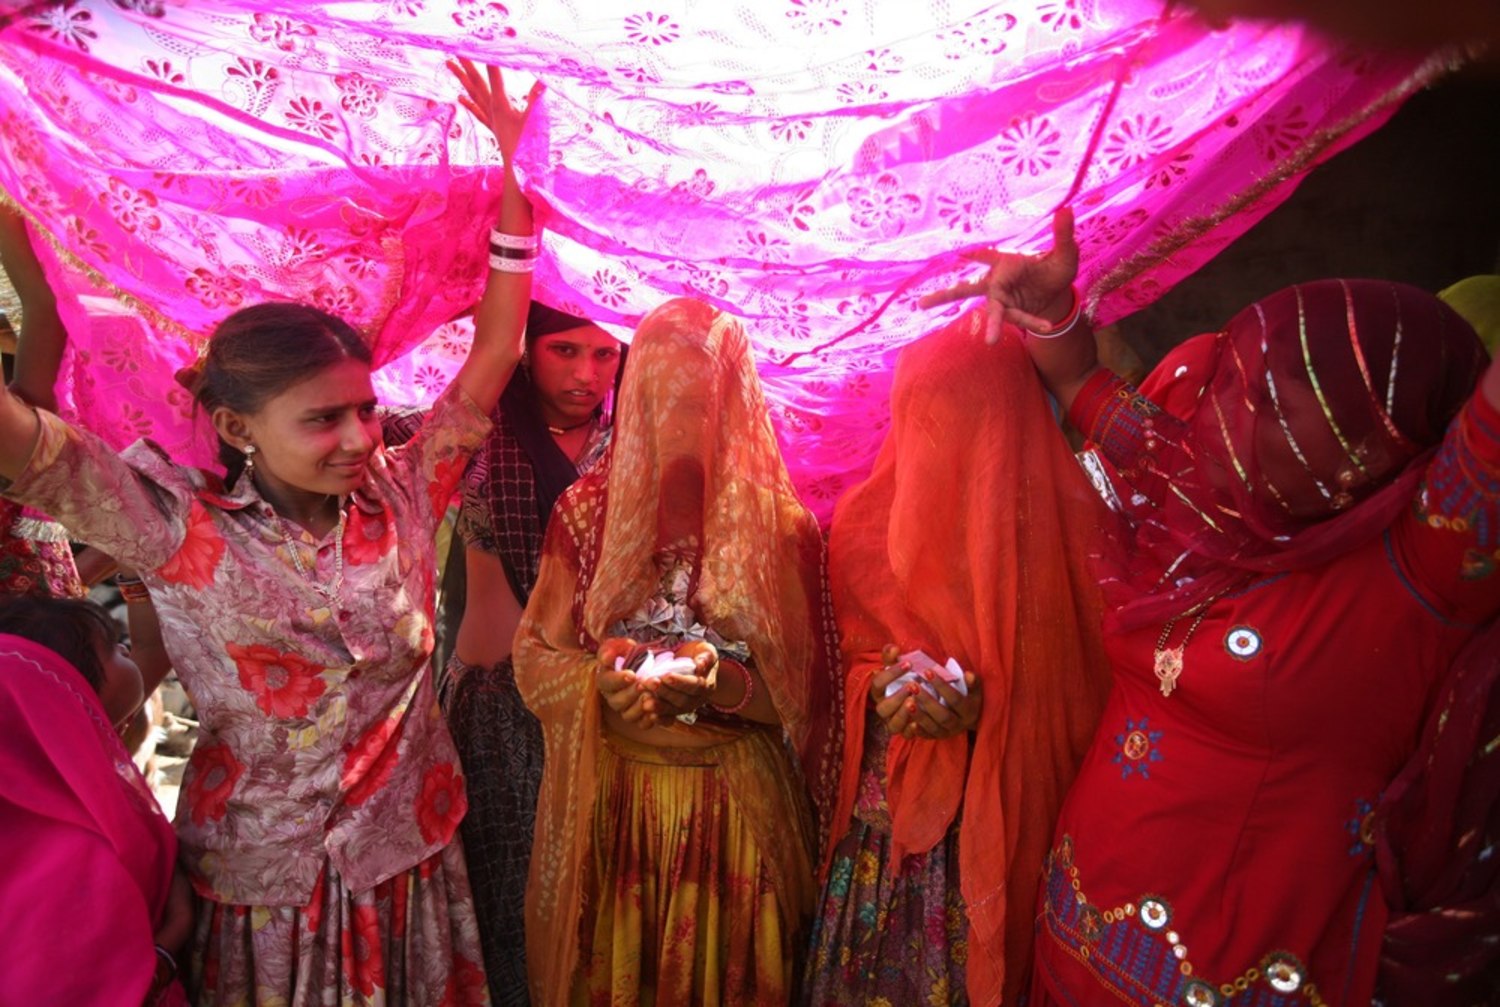 Indian prostitute village marries girls to end flesh trade